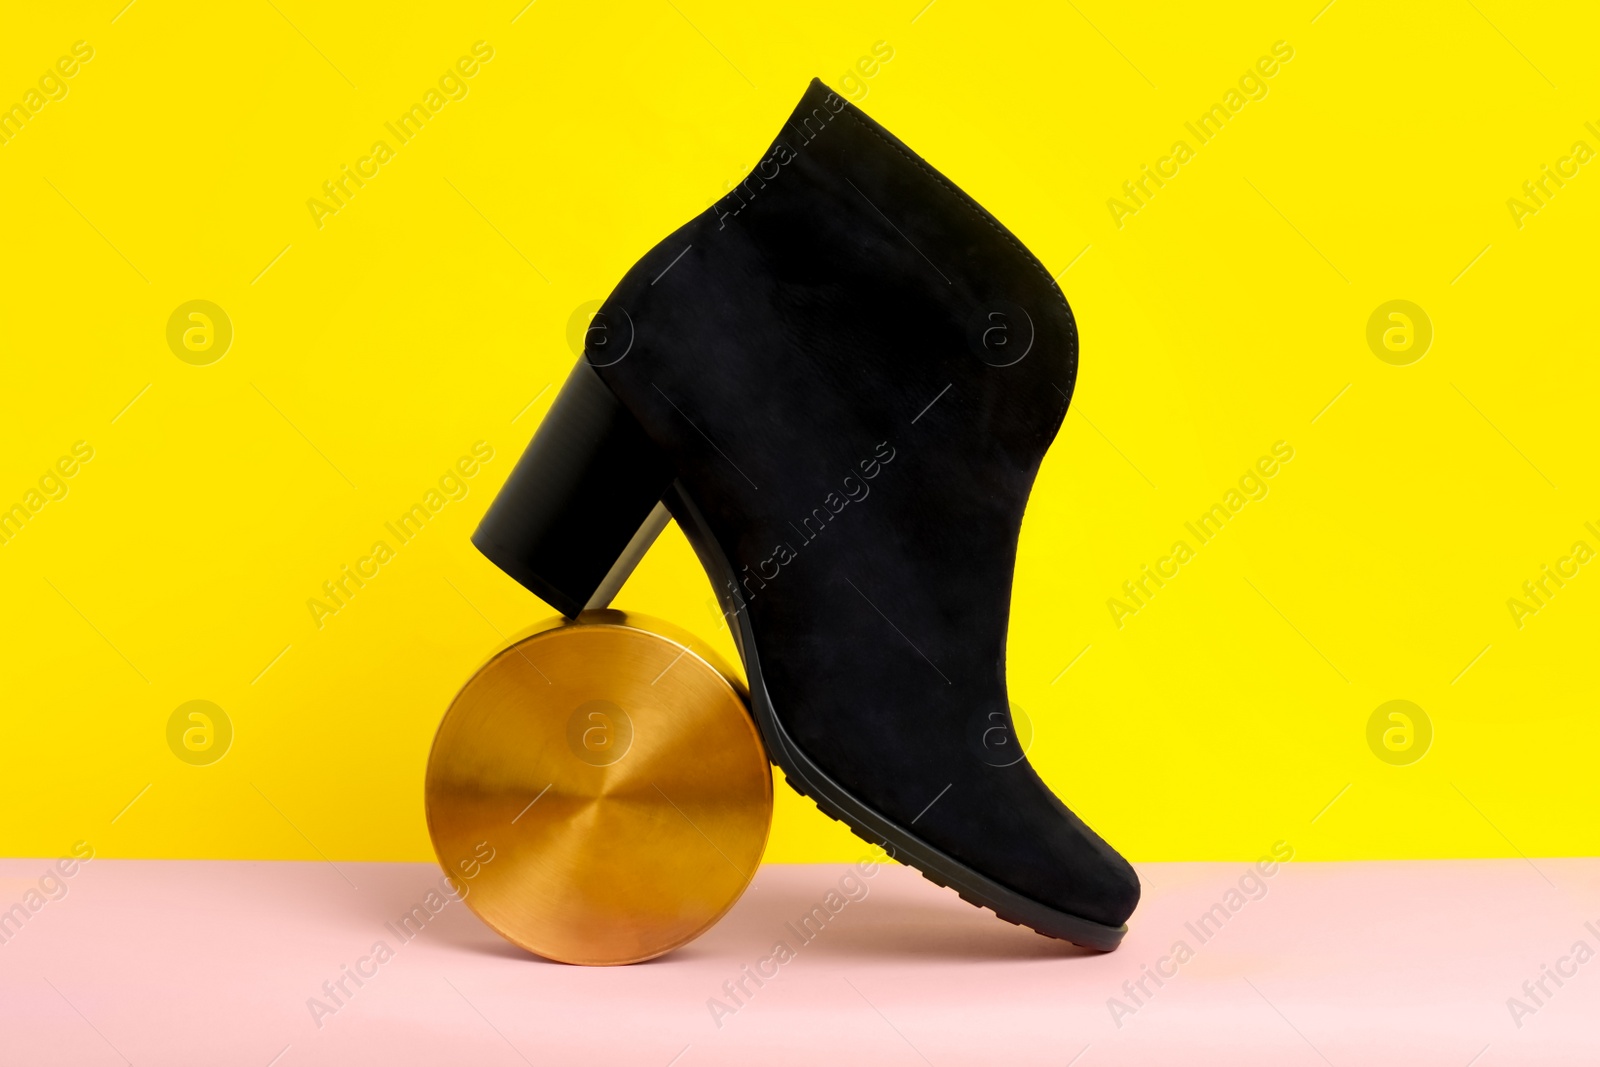 Photo of Stylish black female boot and decor on pink paper against yellow background